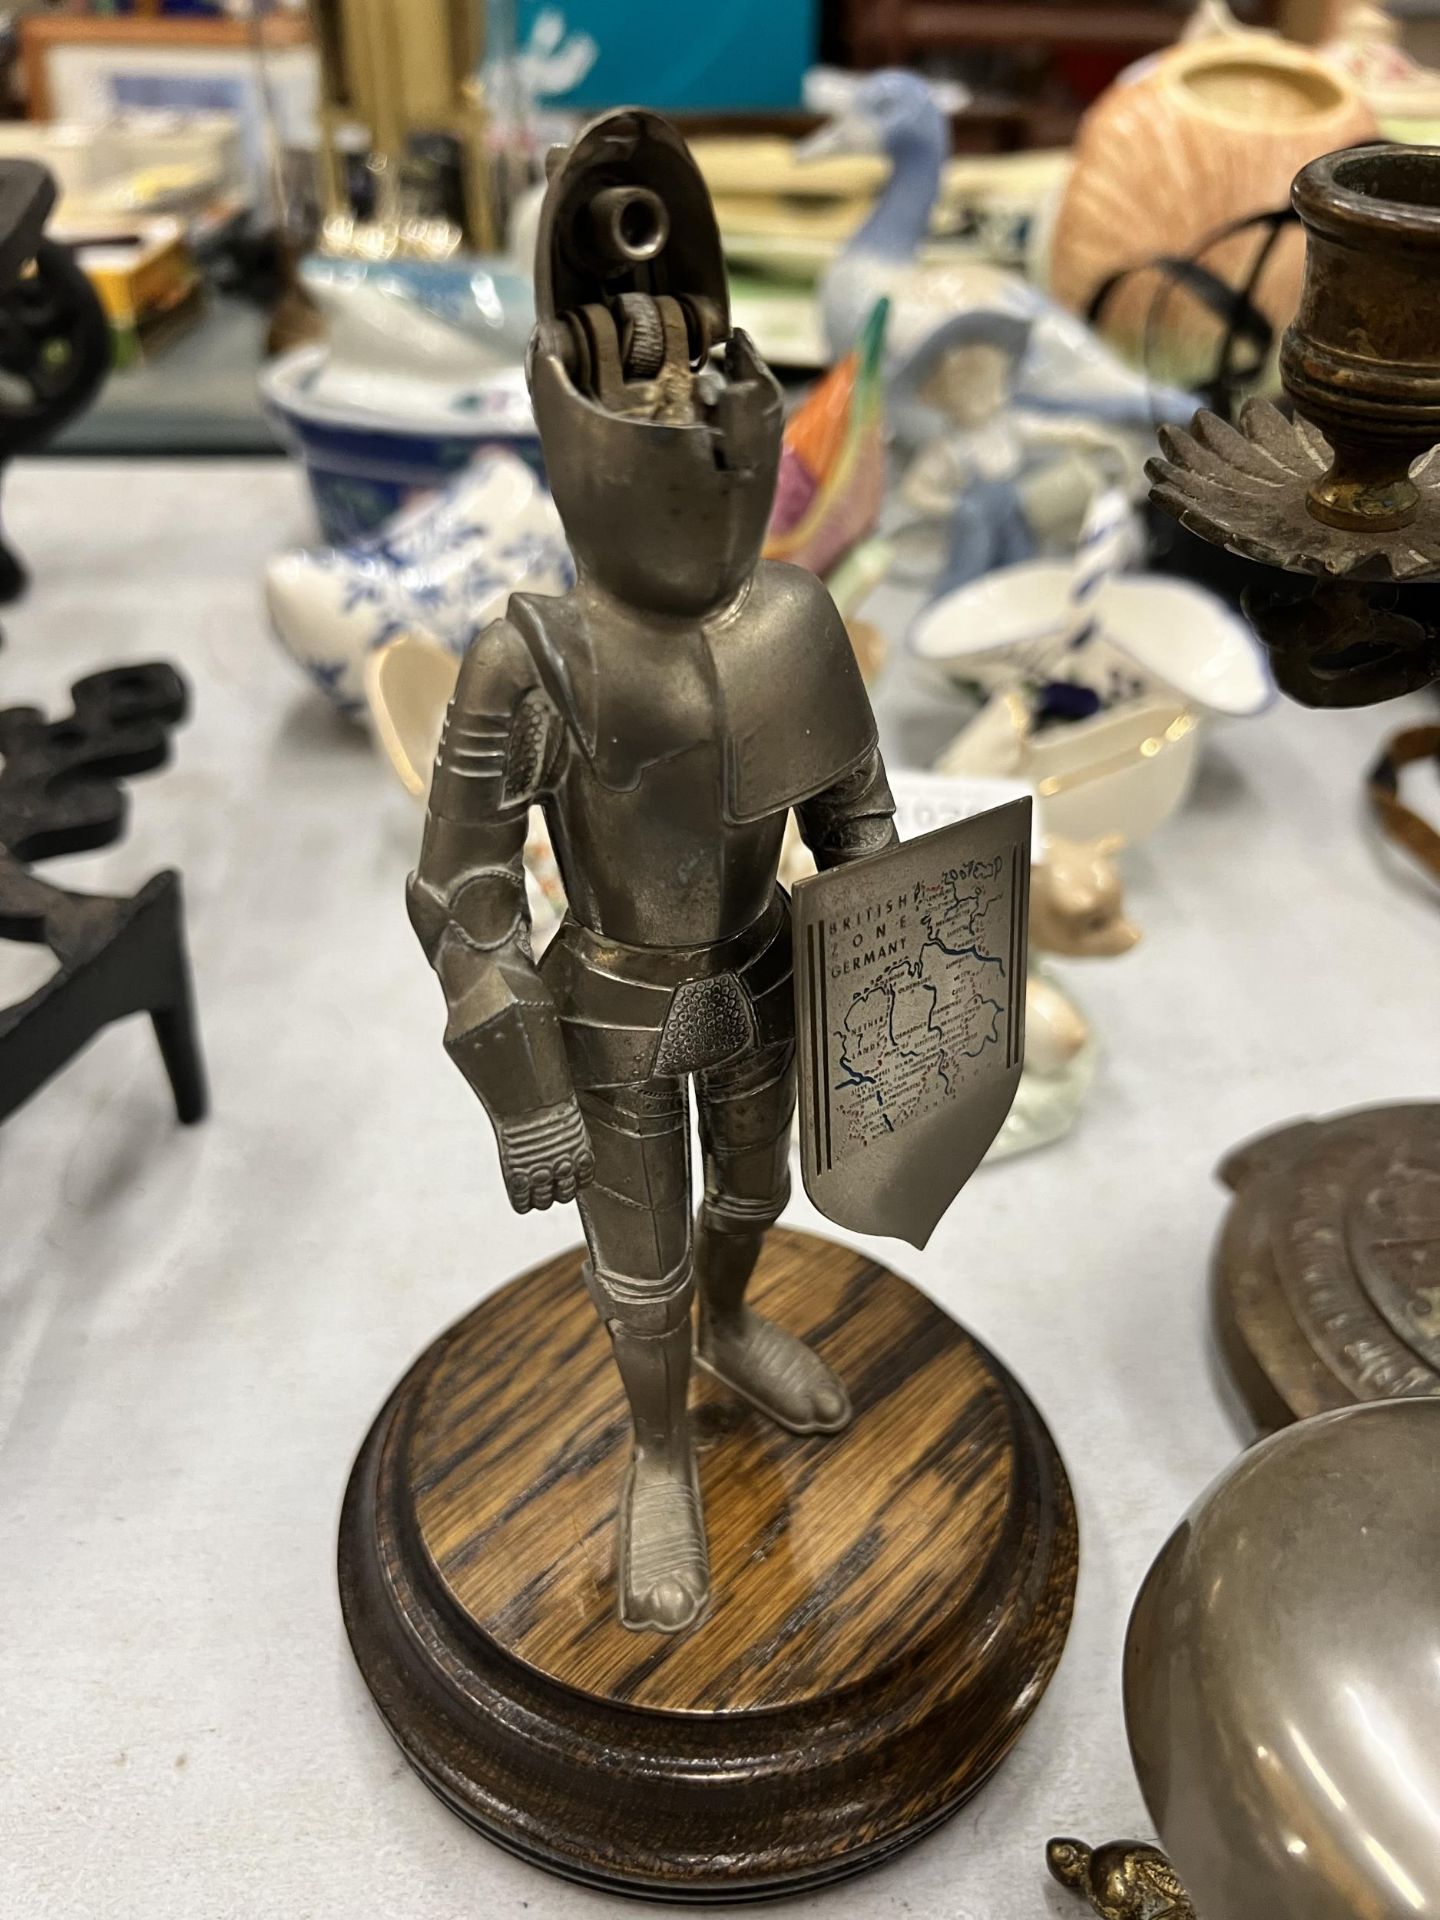 A VINTAGE TABLE LIGHTER IN THE SHAPE OF A KNIGHT, AN ORNATE BRASS CANDLE HOLDER AND A BRASS - Image 2 of 4